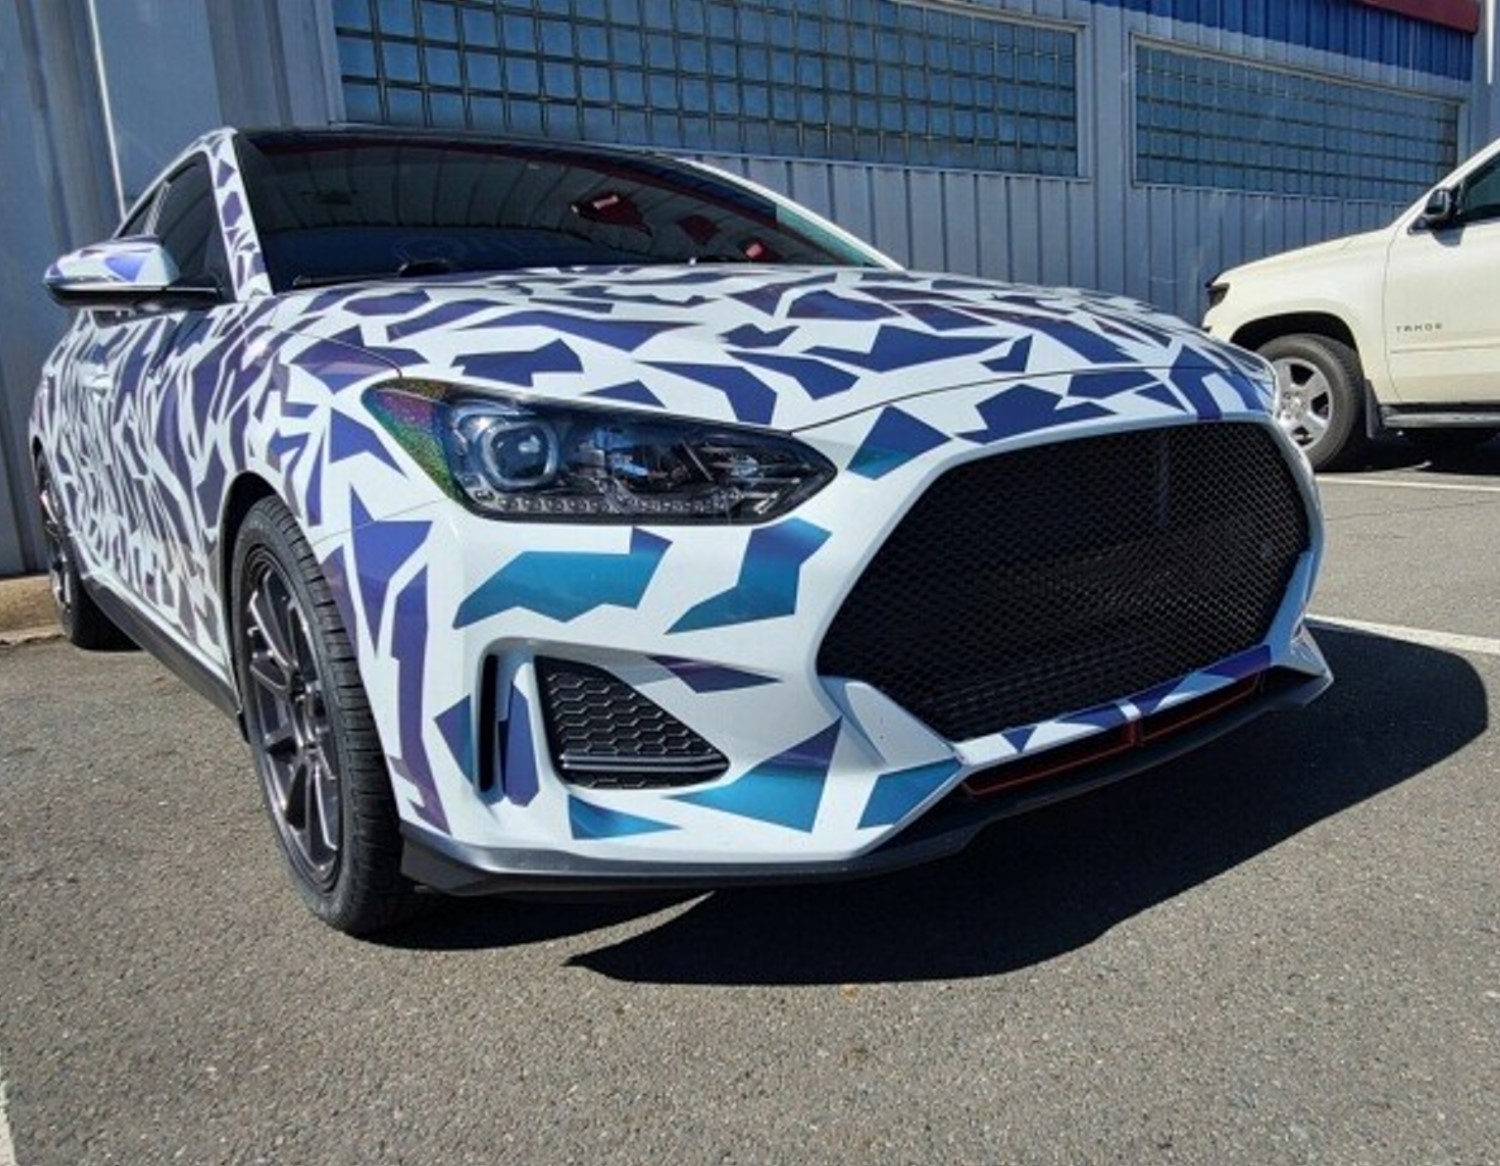 Vinyl Wrapped Hyundai Veloster with Custom Grille: A Bold and Unique Ride